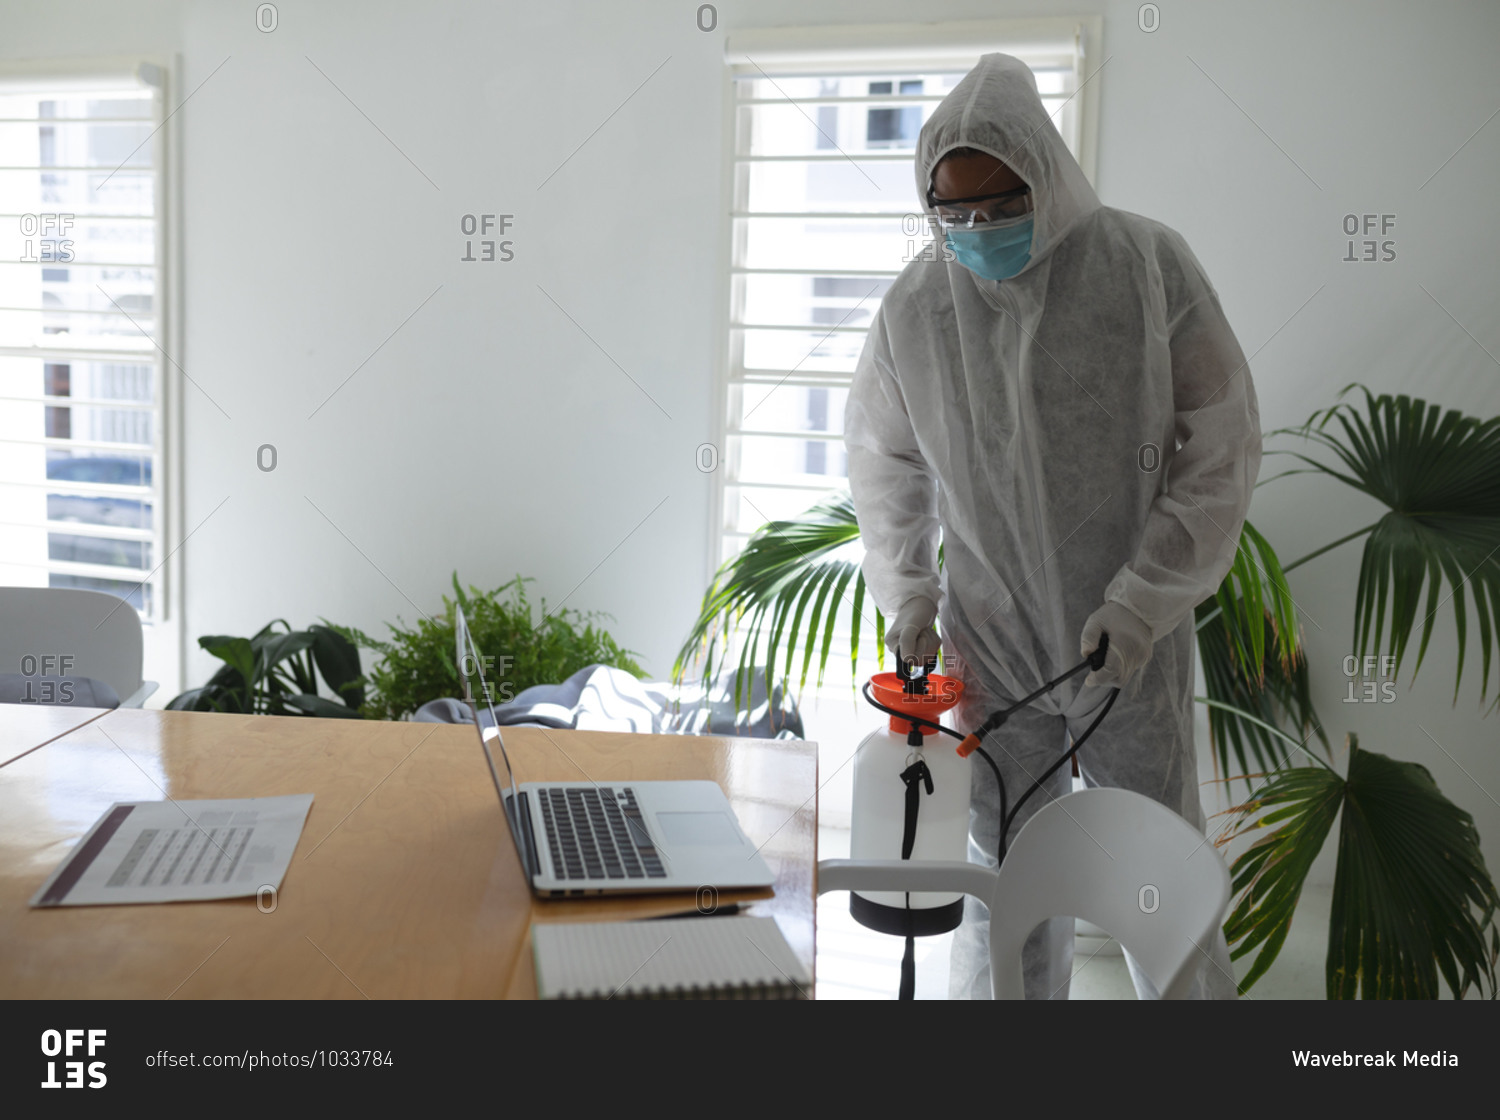 Mixed race male cleaner wearing anti-contamination overalls spraying disinfecting an office. Health and hygiene in the workplace during Coronavirus Covid 19 pandemic.